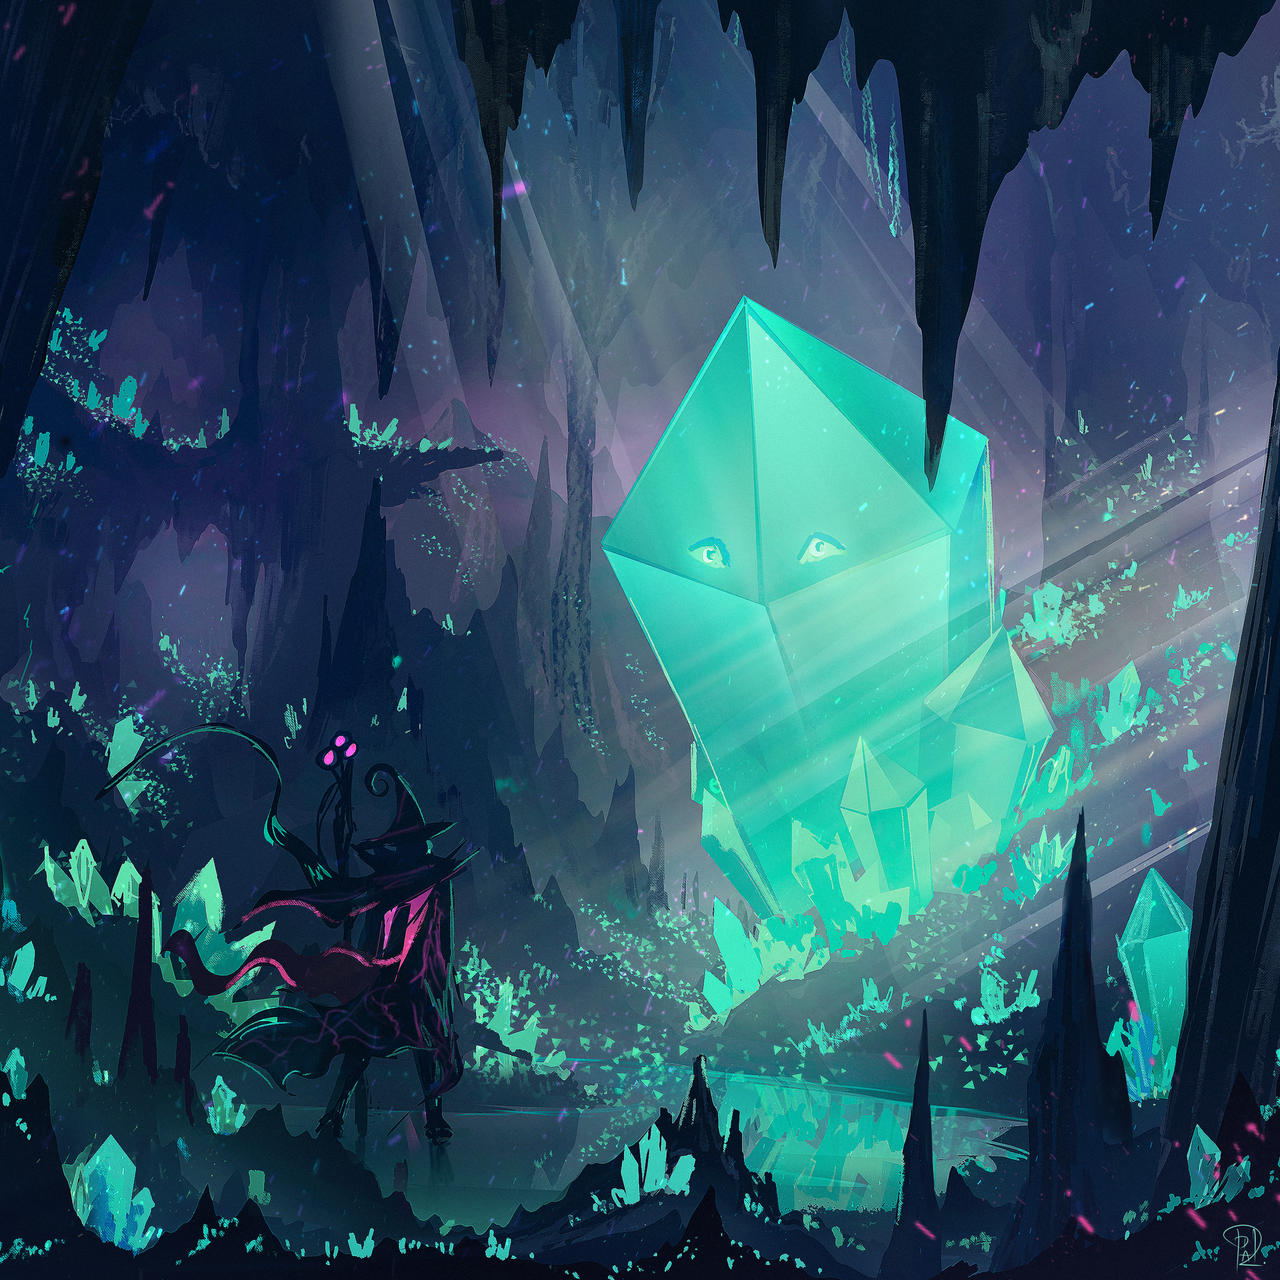 Crystal flowers in the hidden cave by rineJourney on DeviantArt